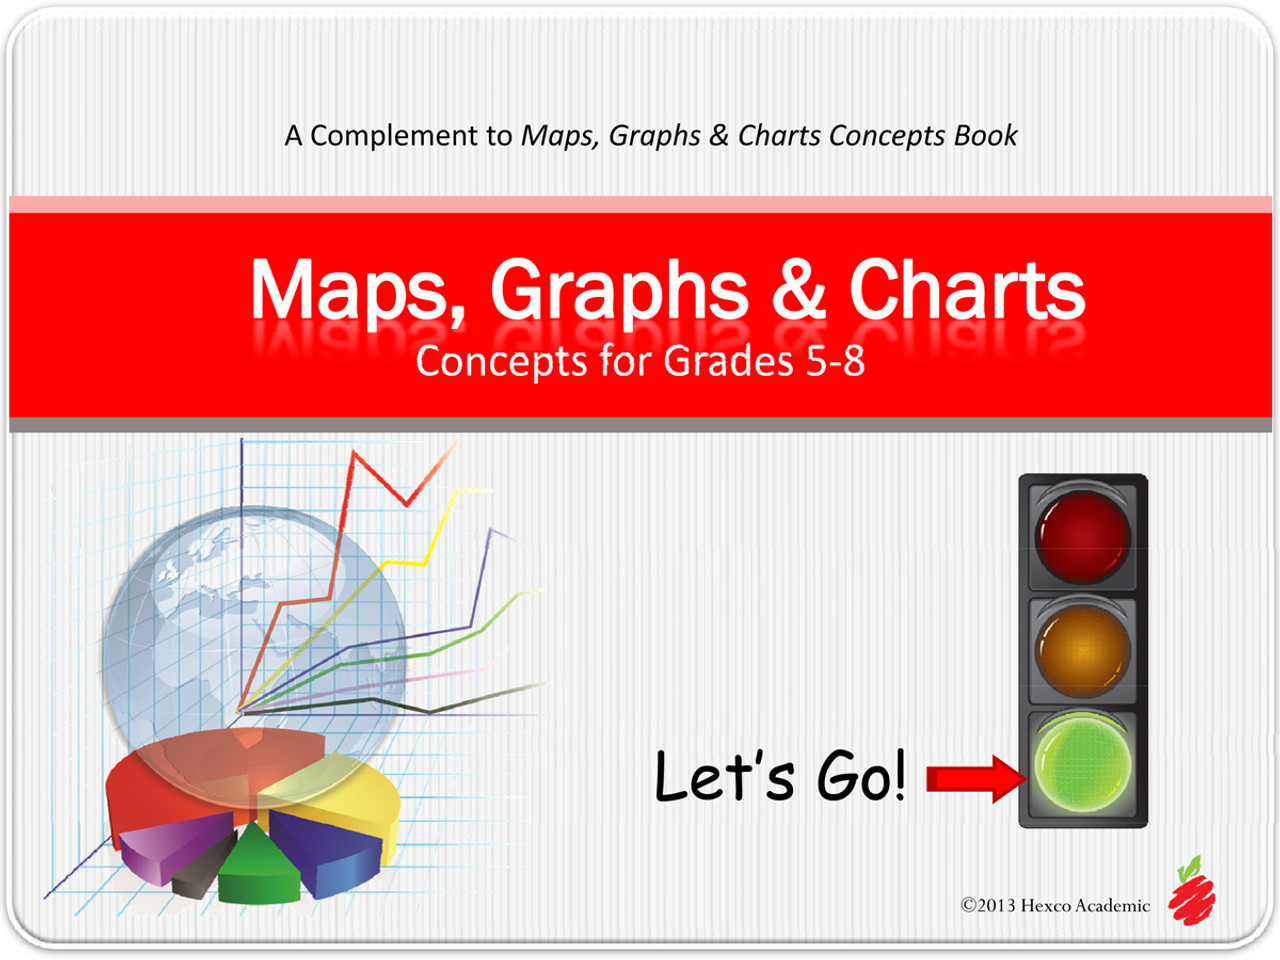 Uil Maps Graphs And Charts